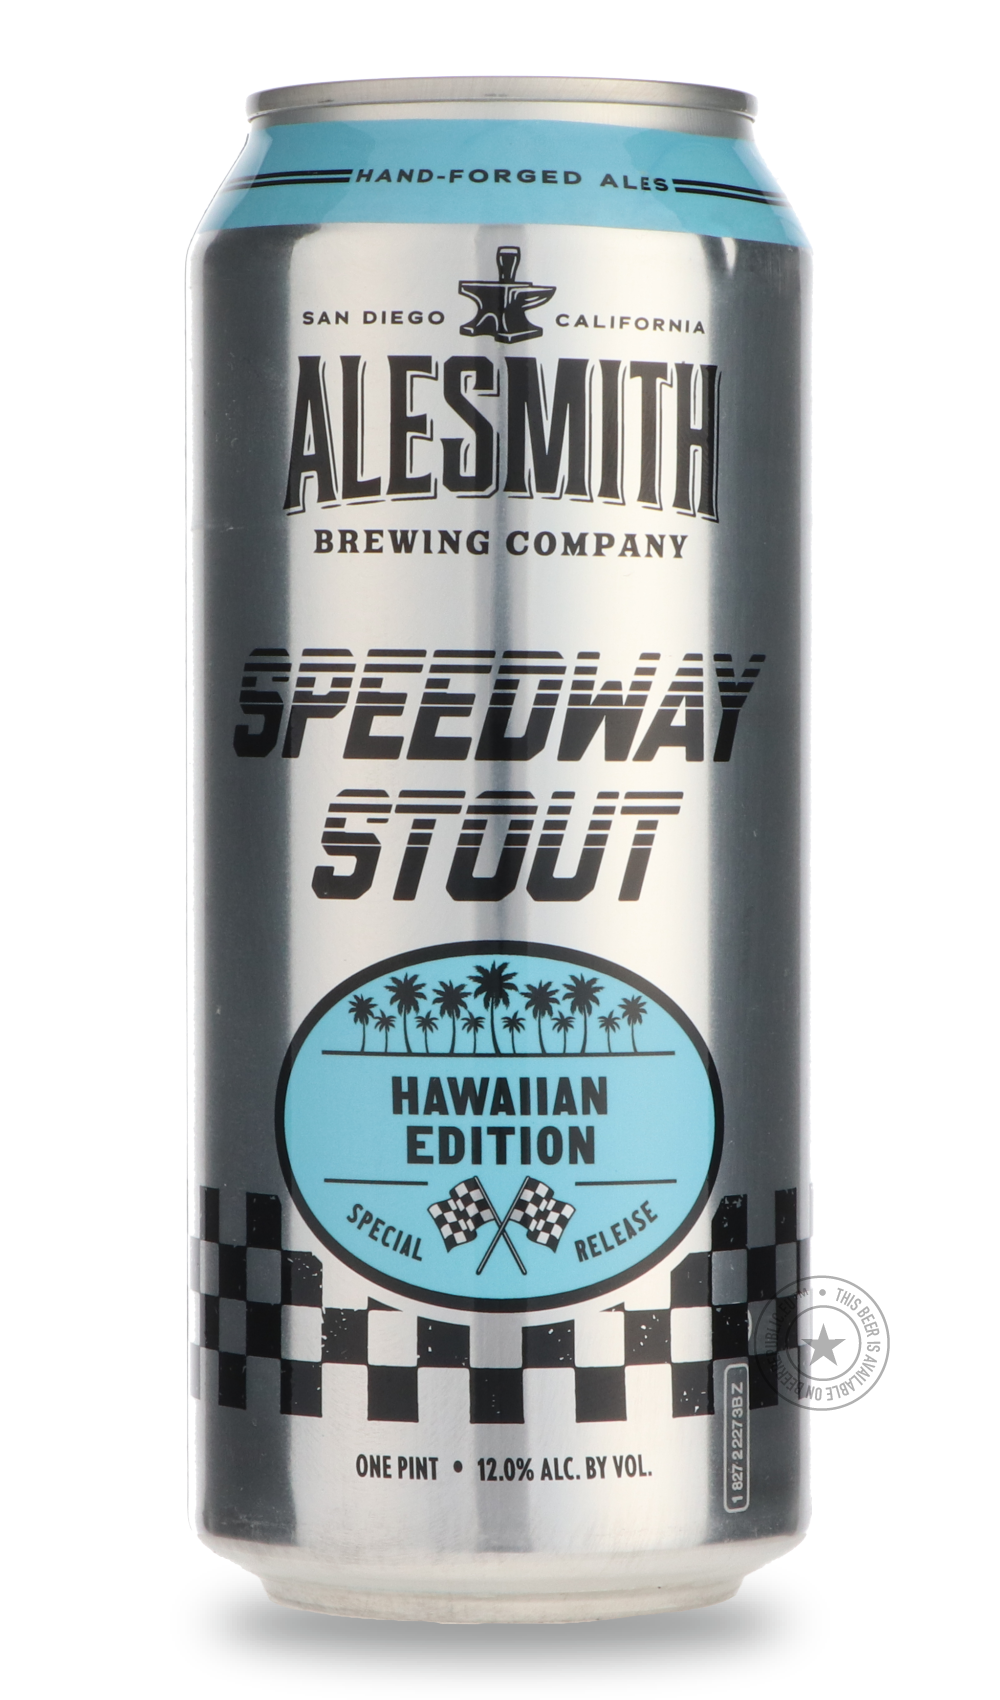 -AleSmith- Speedway Stout: Hawaï Edition-Stout & Porter- Only @ Beer Republic - The best online beer store for American & Canadian craft beer - Buy beer online from the USA and Canada - Bier online kopen - Amerikaans bier kopen - Craft beer store - Craft beer kopen - Amerikanisch bier kaufen - Bier online kaufen - Acheter biere online - IPA - Stout - Porter - New England IPA - Hazy IPA - Imperial Stout - Barrel Aged - Barrel Aged Imperial Stout - Brown - Dark beer - Blond - Blonde - Pilsner - Lager - Wheat 